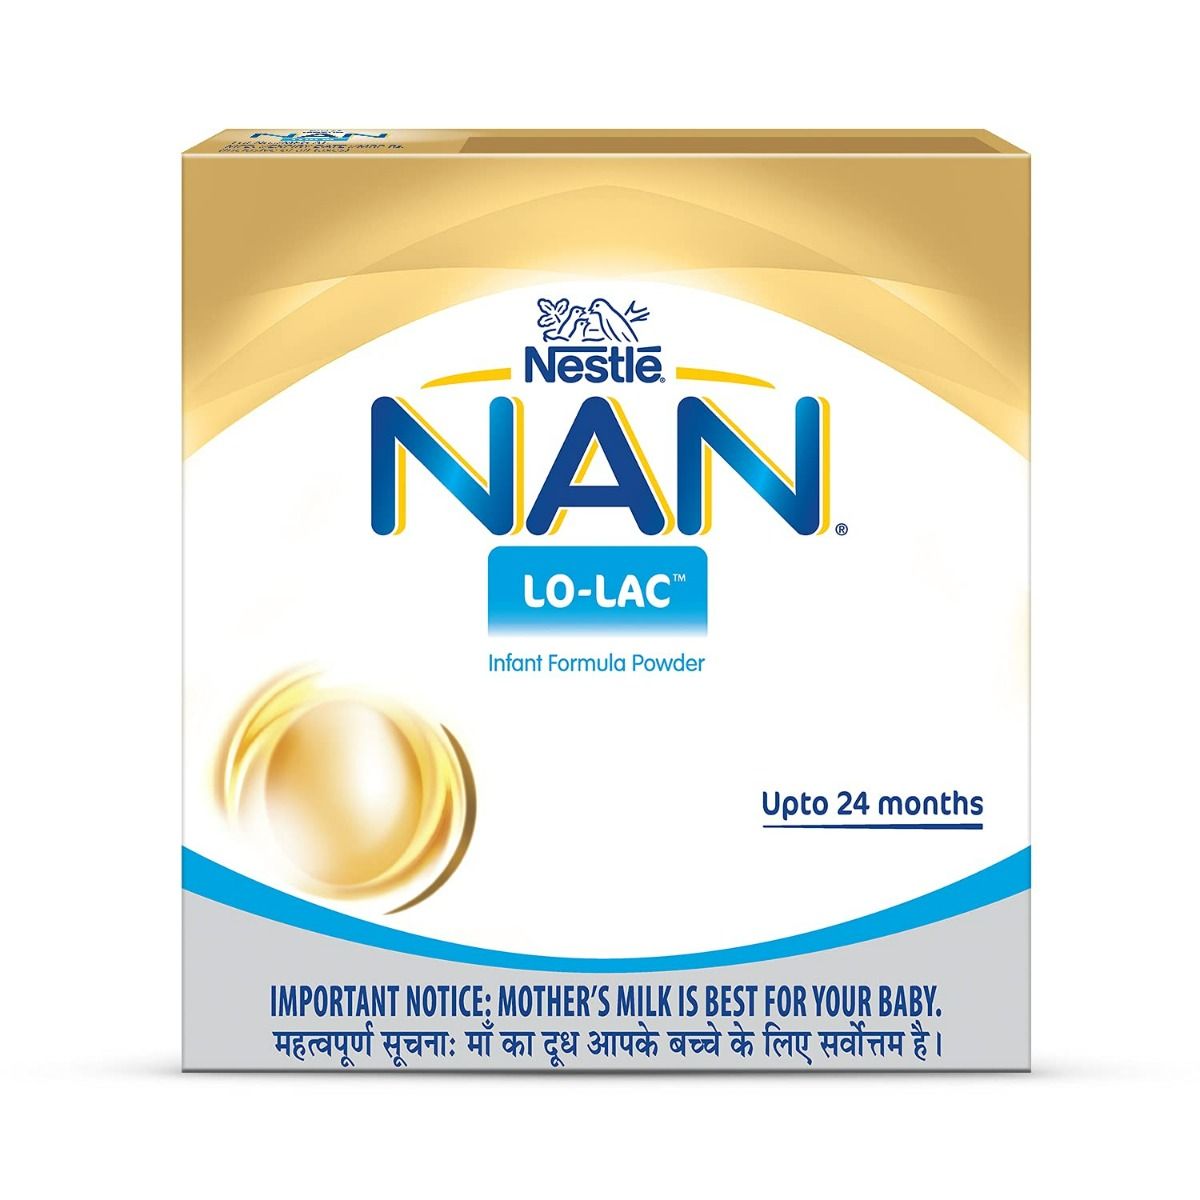 Buy Nestle Nan Lo-Lac Infant Formula (Up to 24 Months) Powder, 200 gm Refill Pack Online